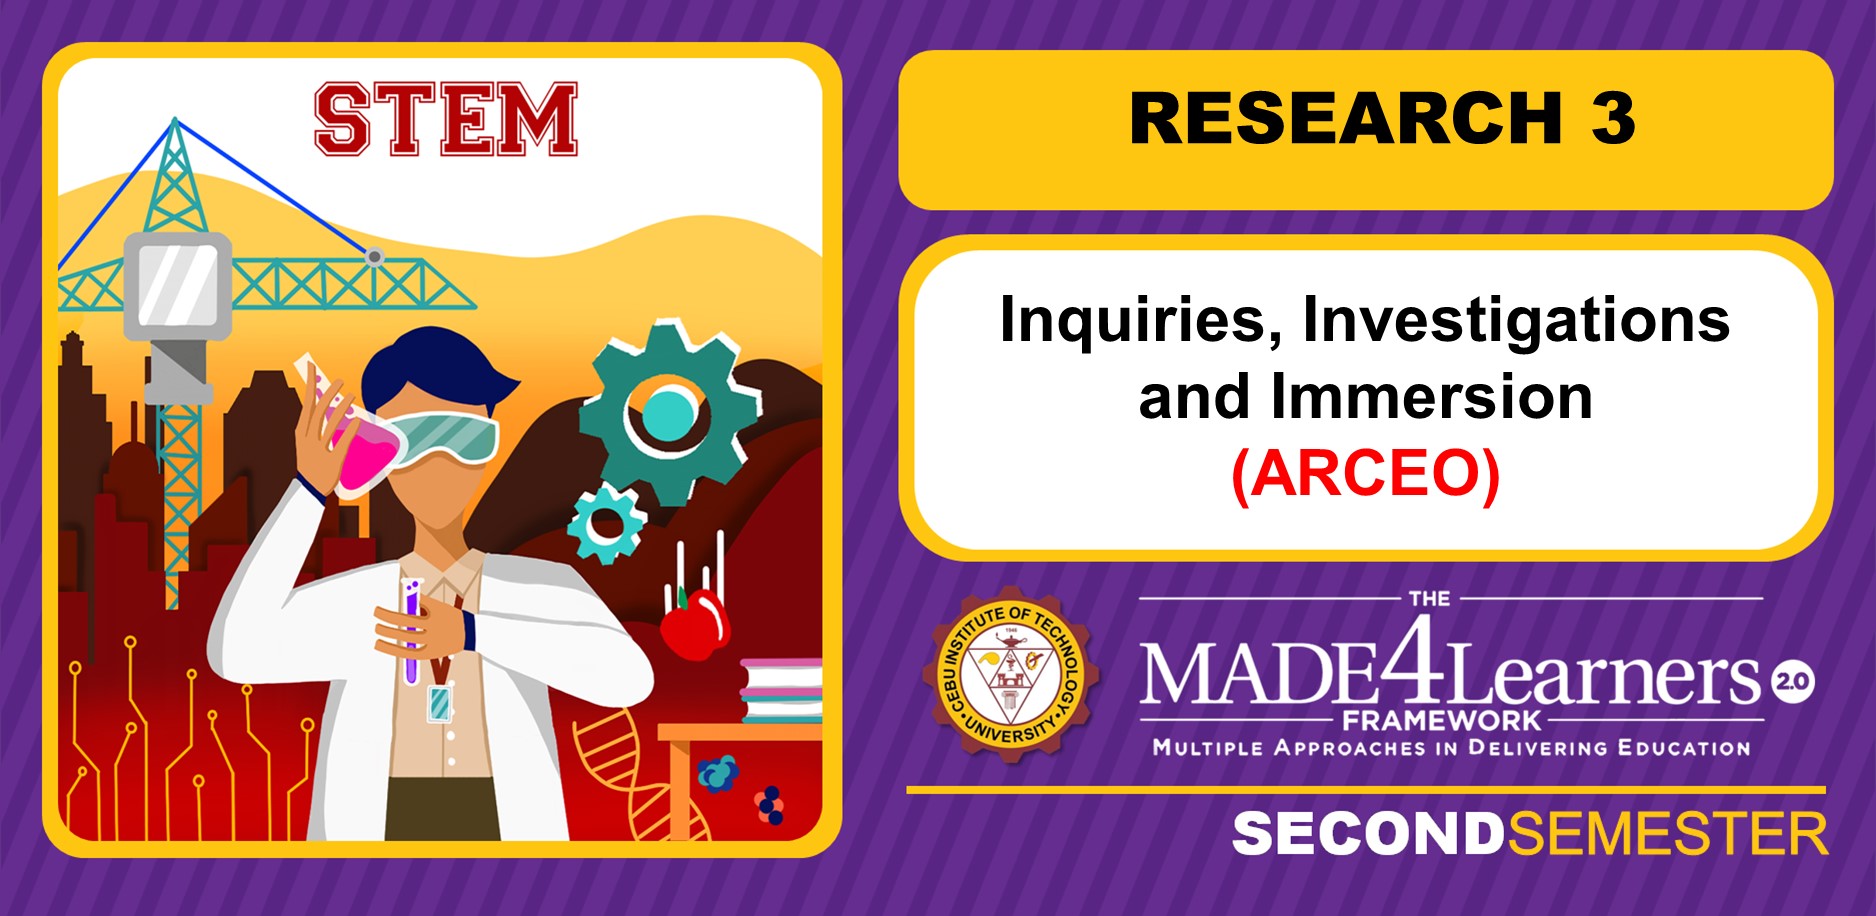 RES3: Research Inquiries, Investigation and Immersion (Arceo)